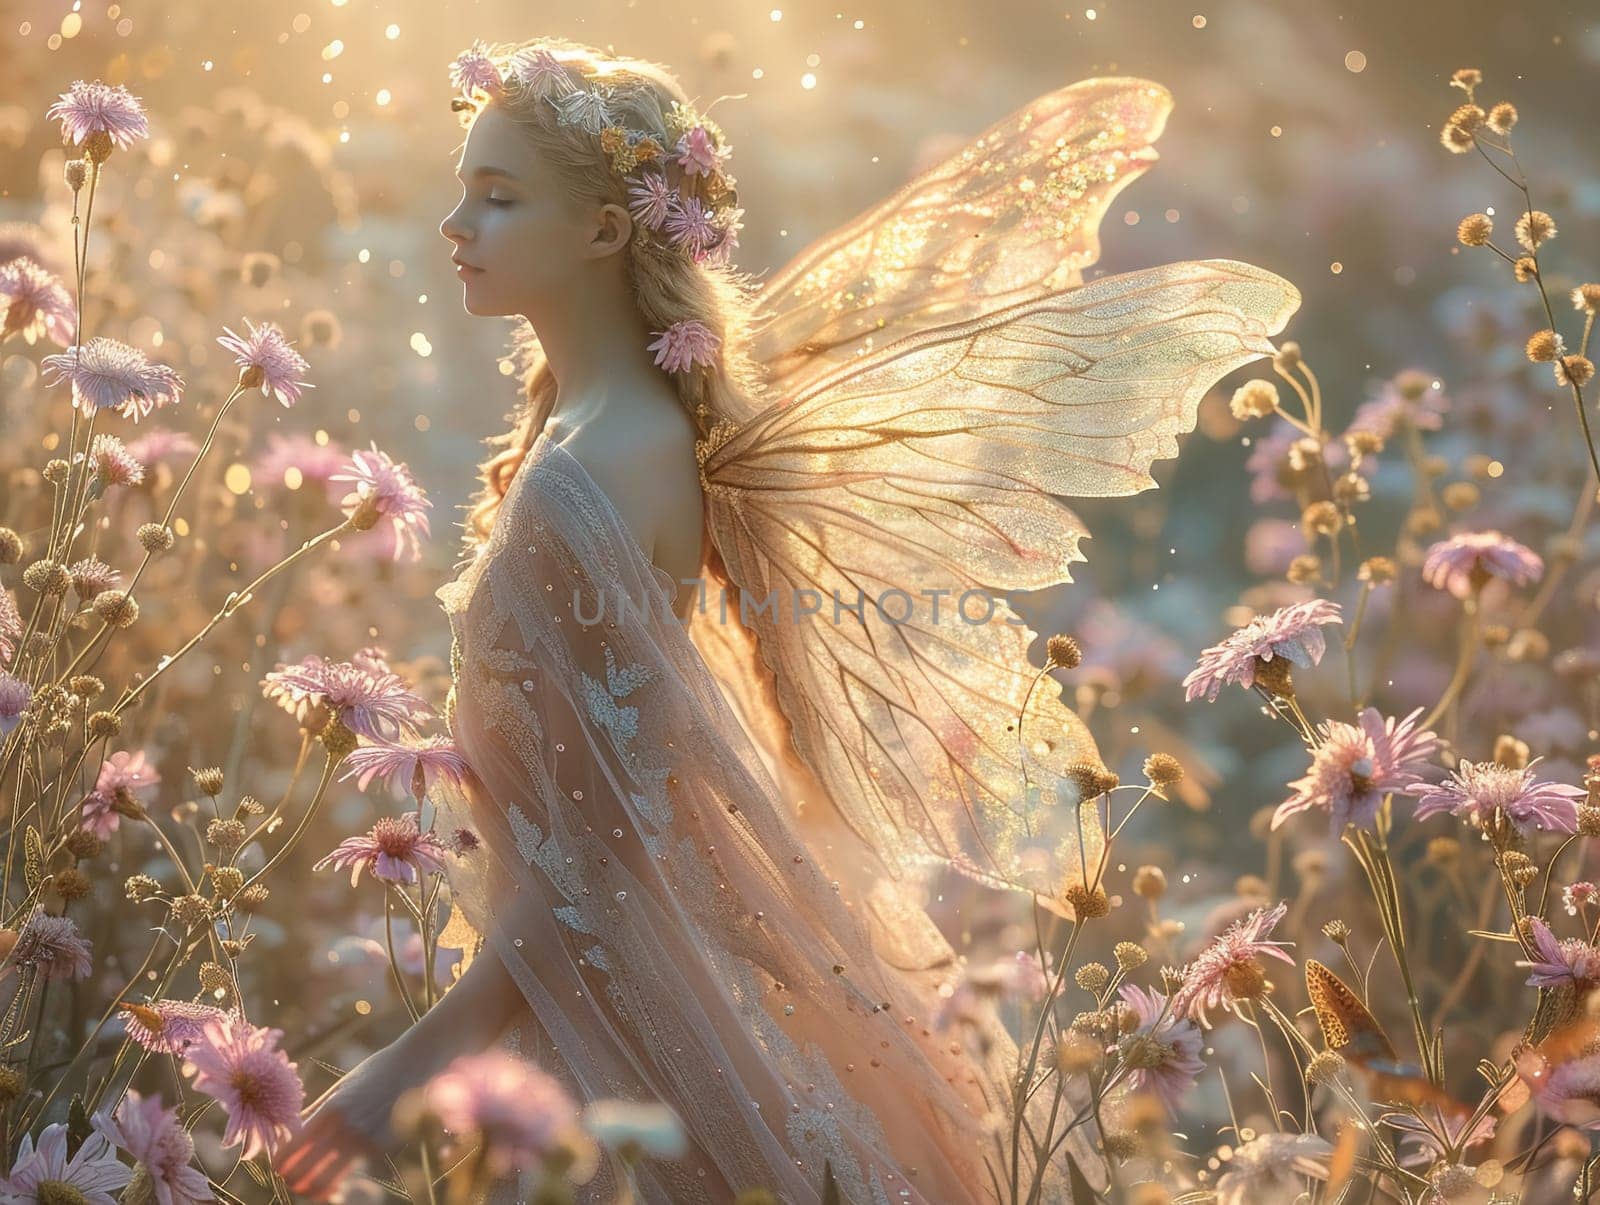 Creative elements of a mystical garden, new stock images with PNG files showing ethereal flowers and fairies.